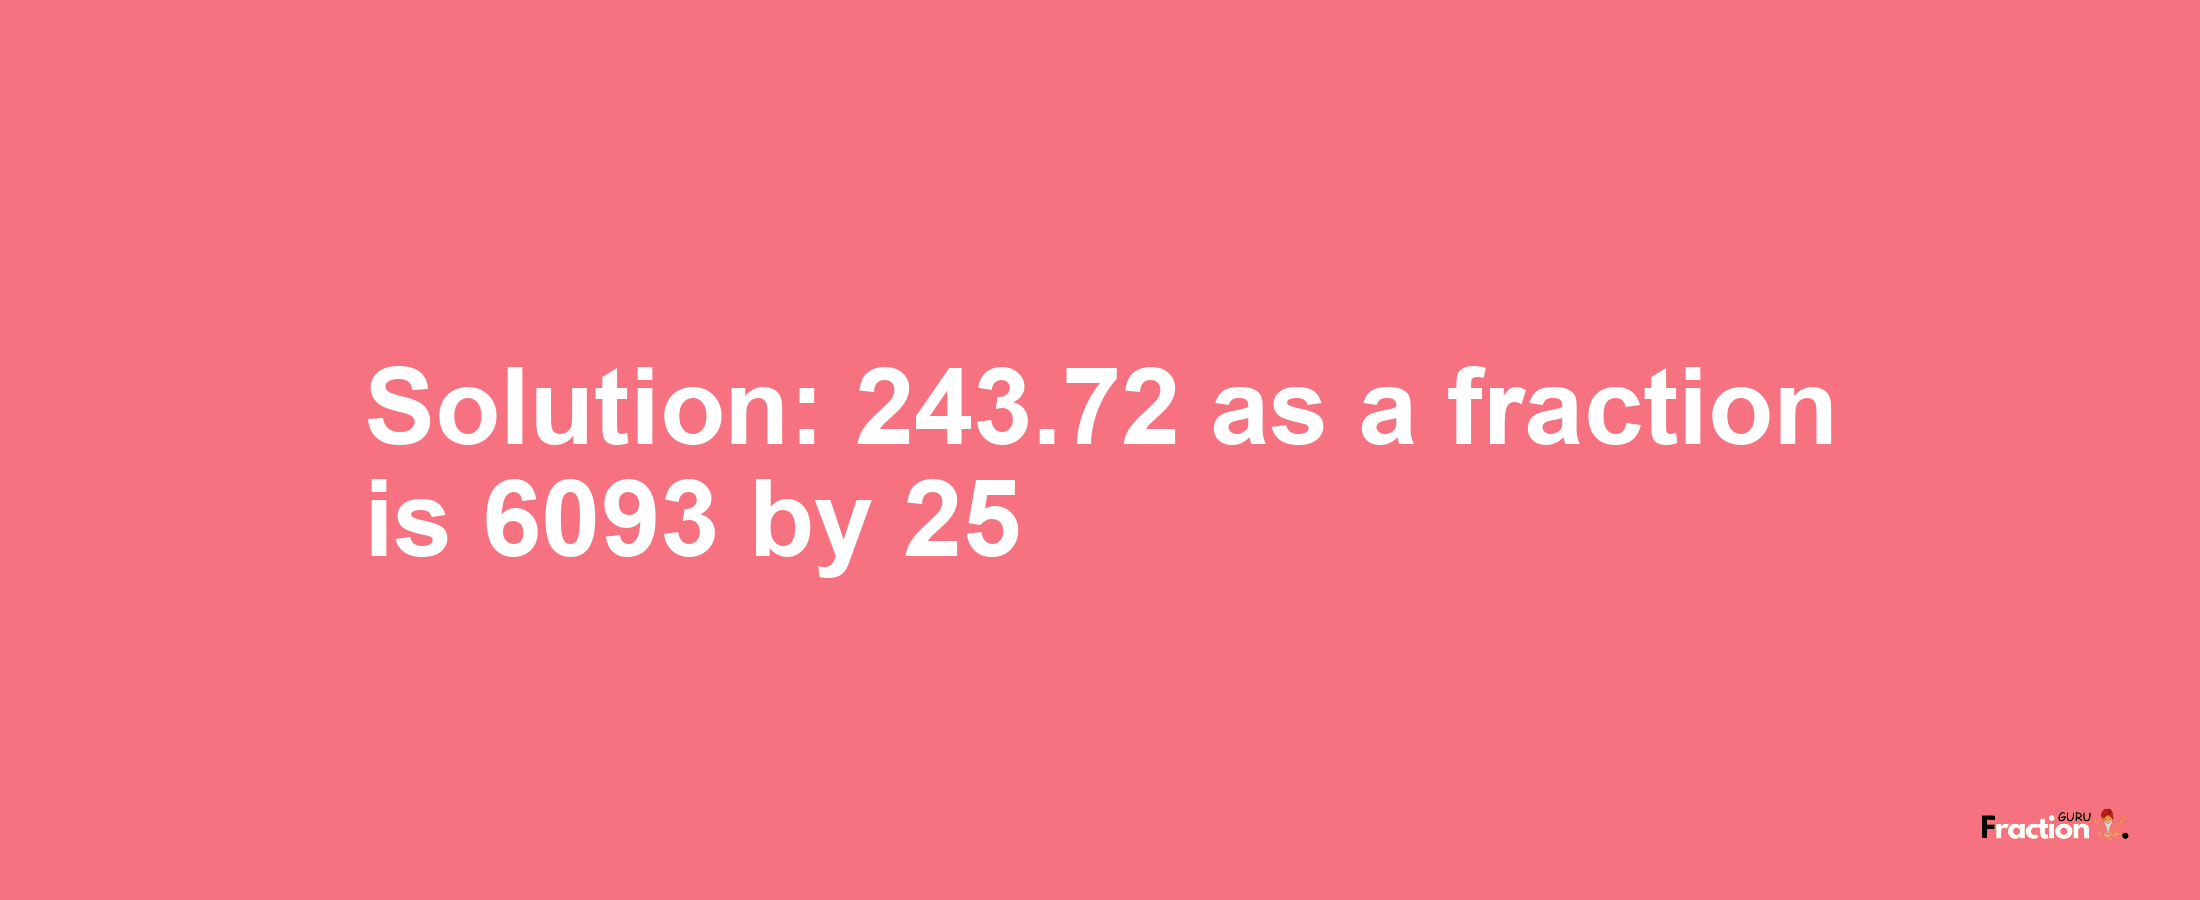 Solution:243.72 as a fraction is 6093/25